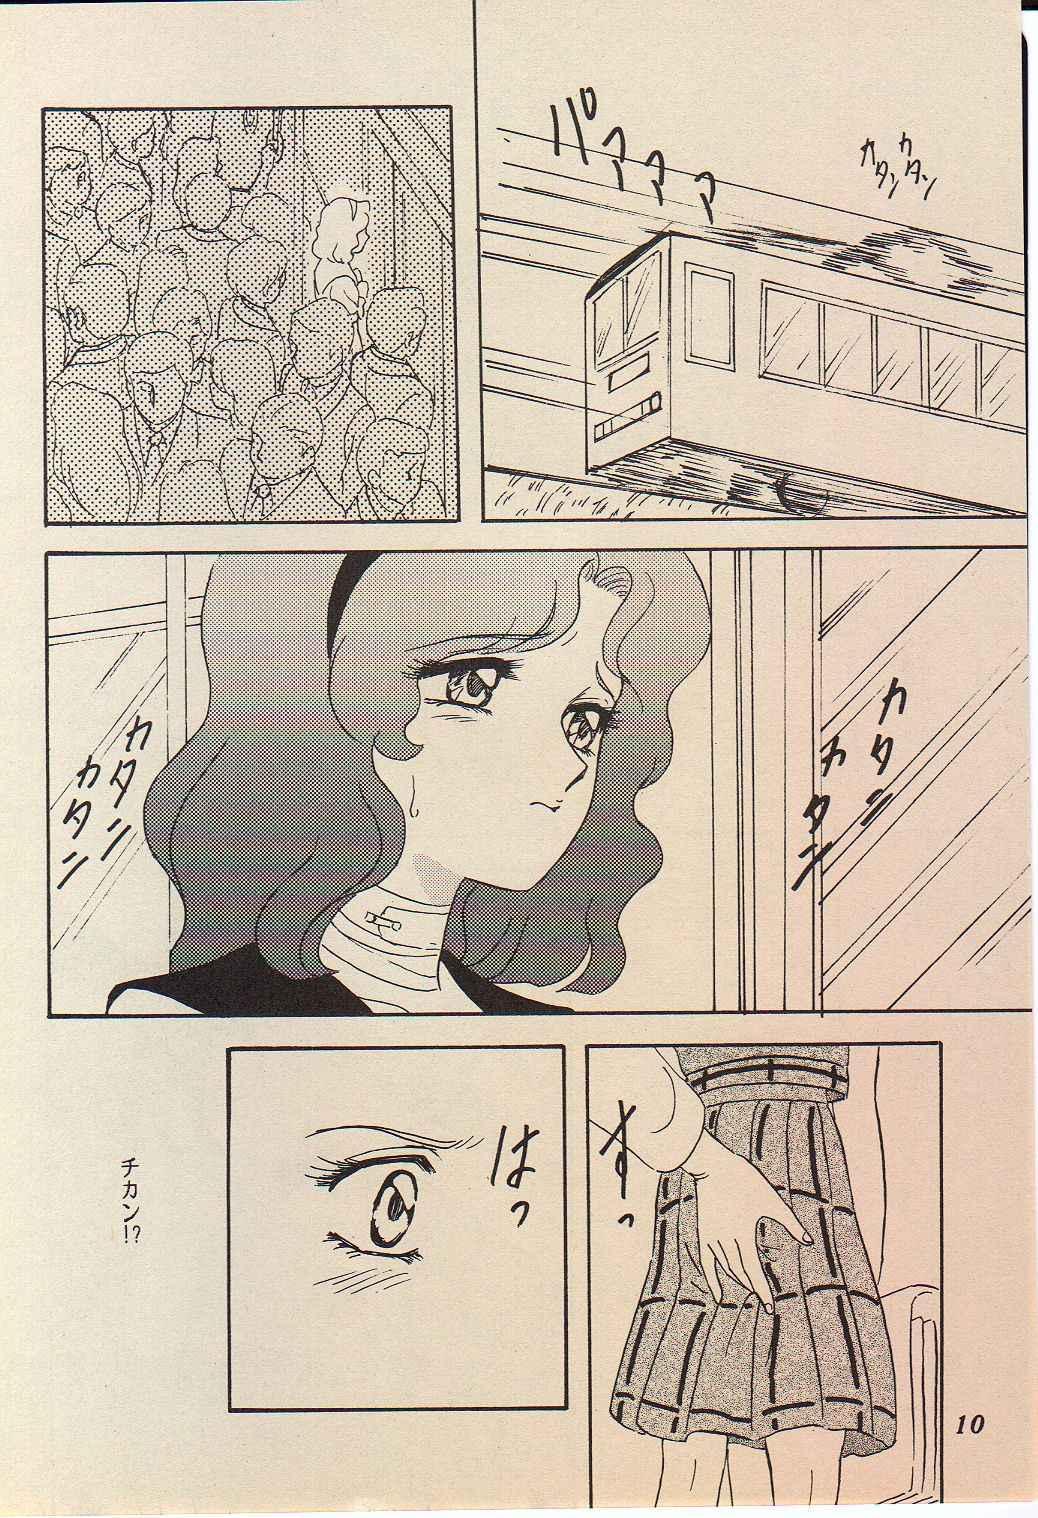 Parties Lunch Box 11 - Twinkle Twinkle - Sailor moon Dick Sucking Porn - Page 9